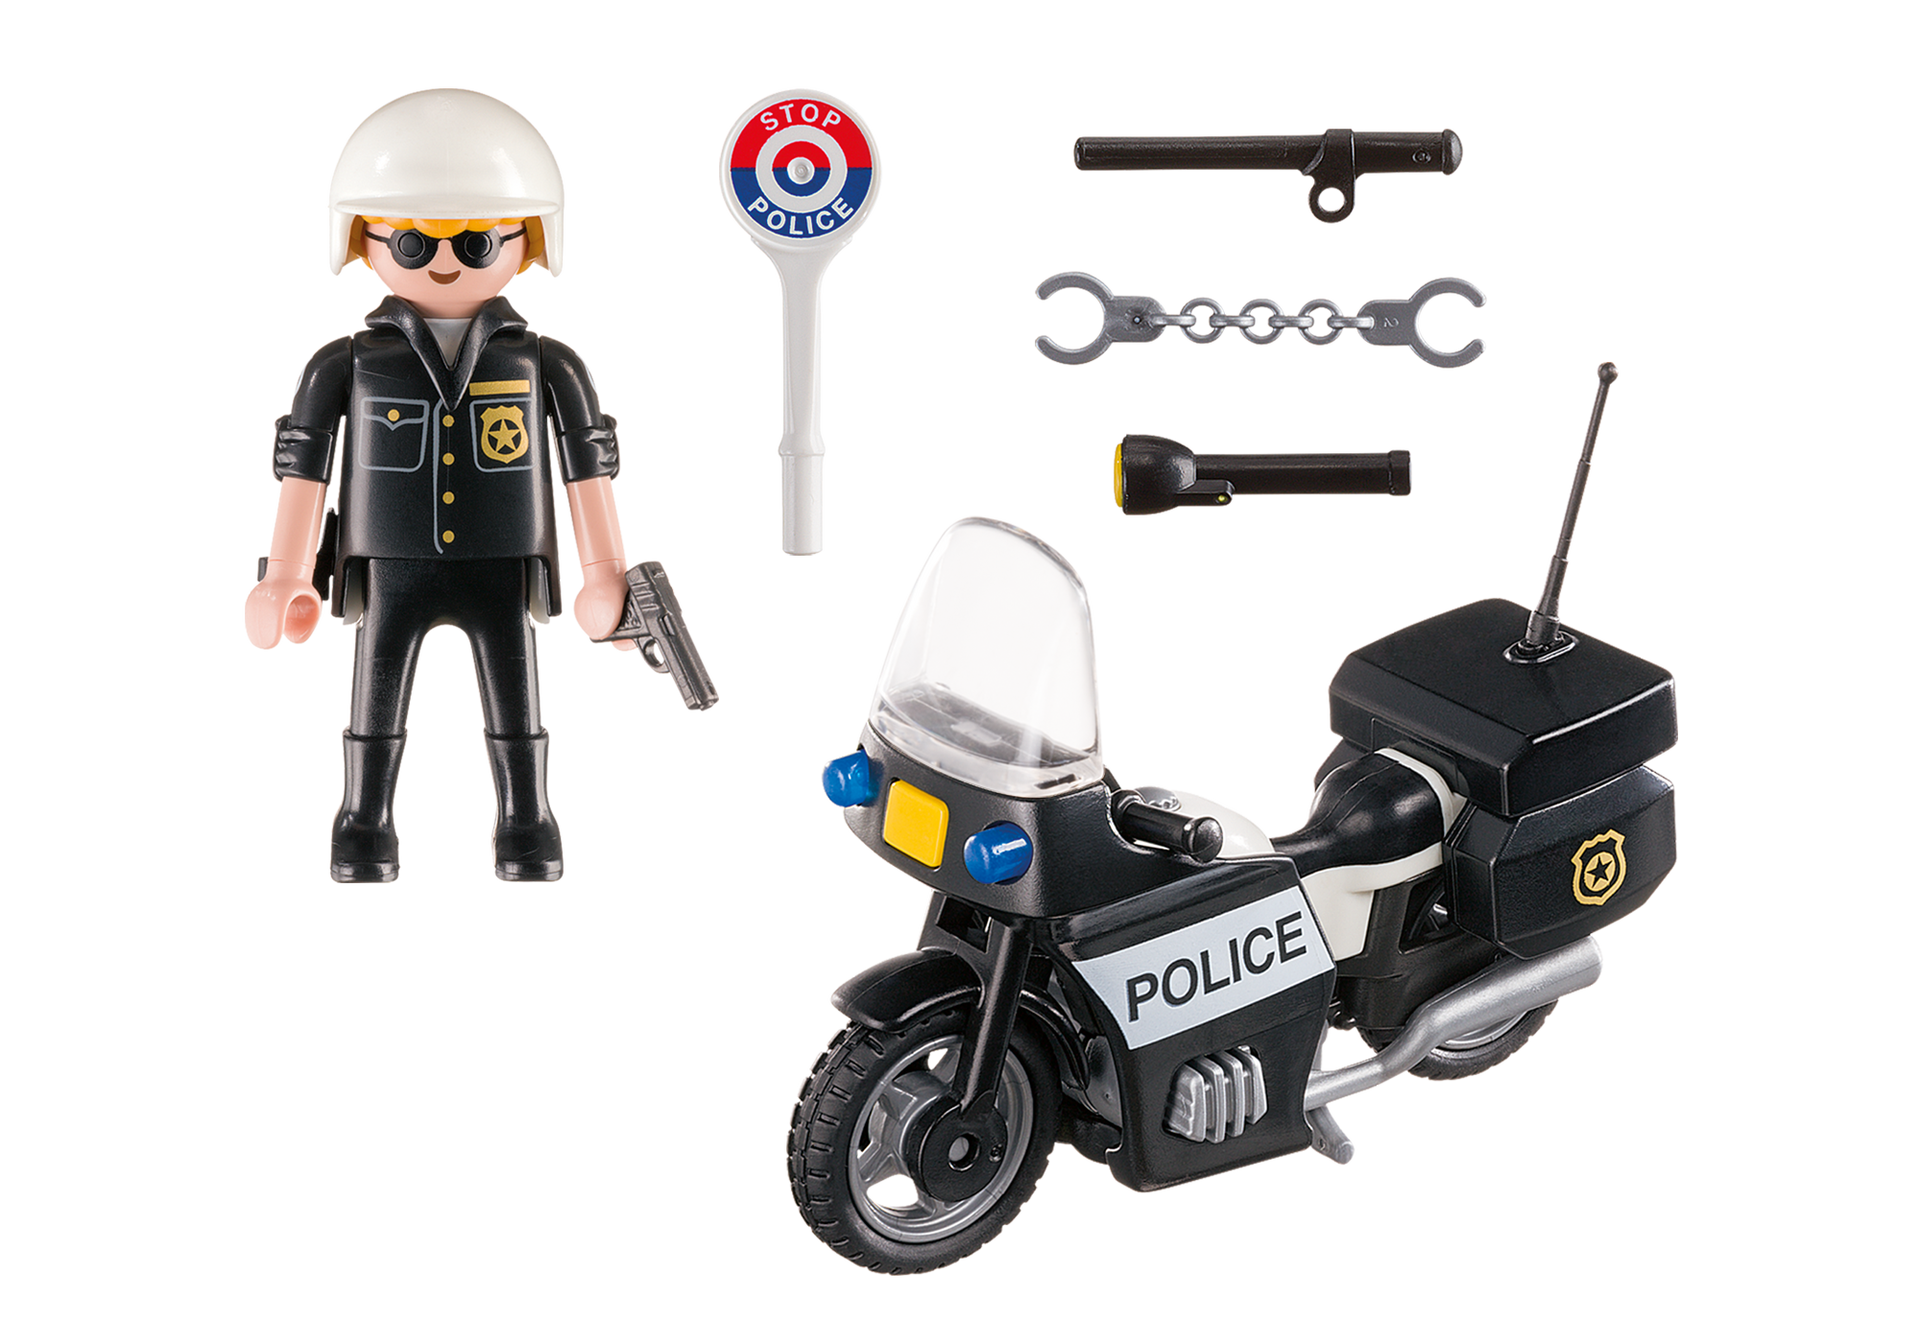 Playmobil police-gun and cable ref 1045 